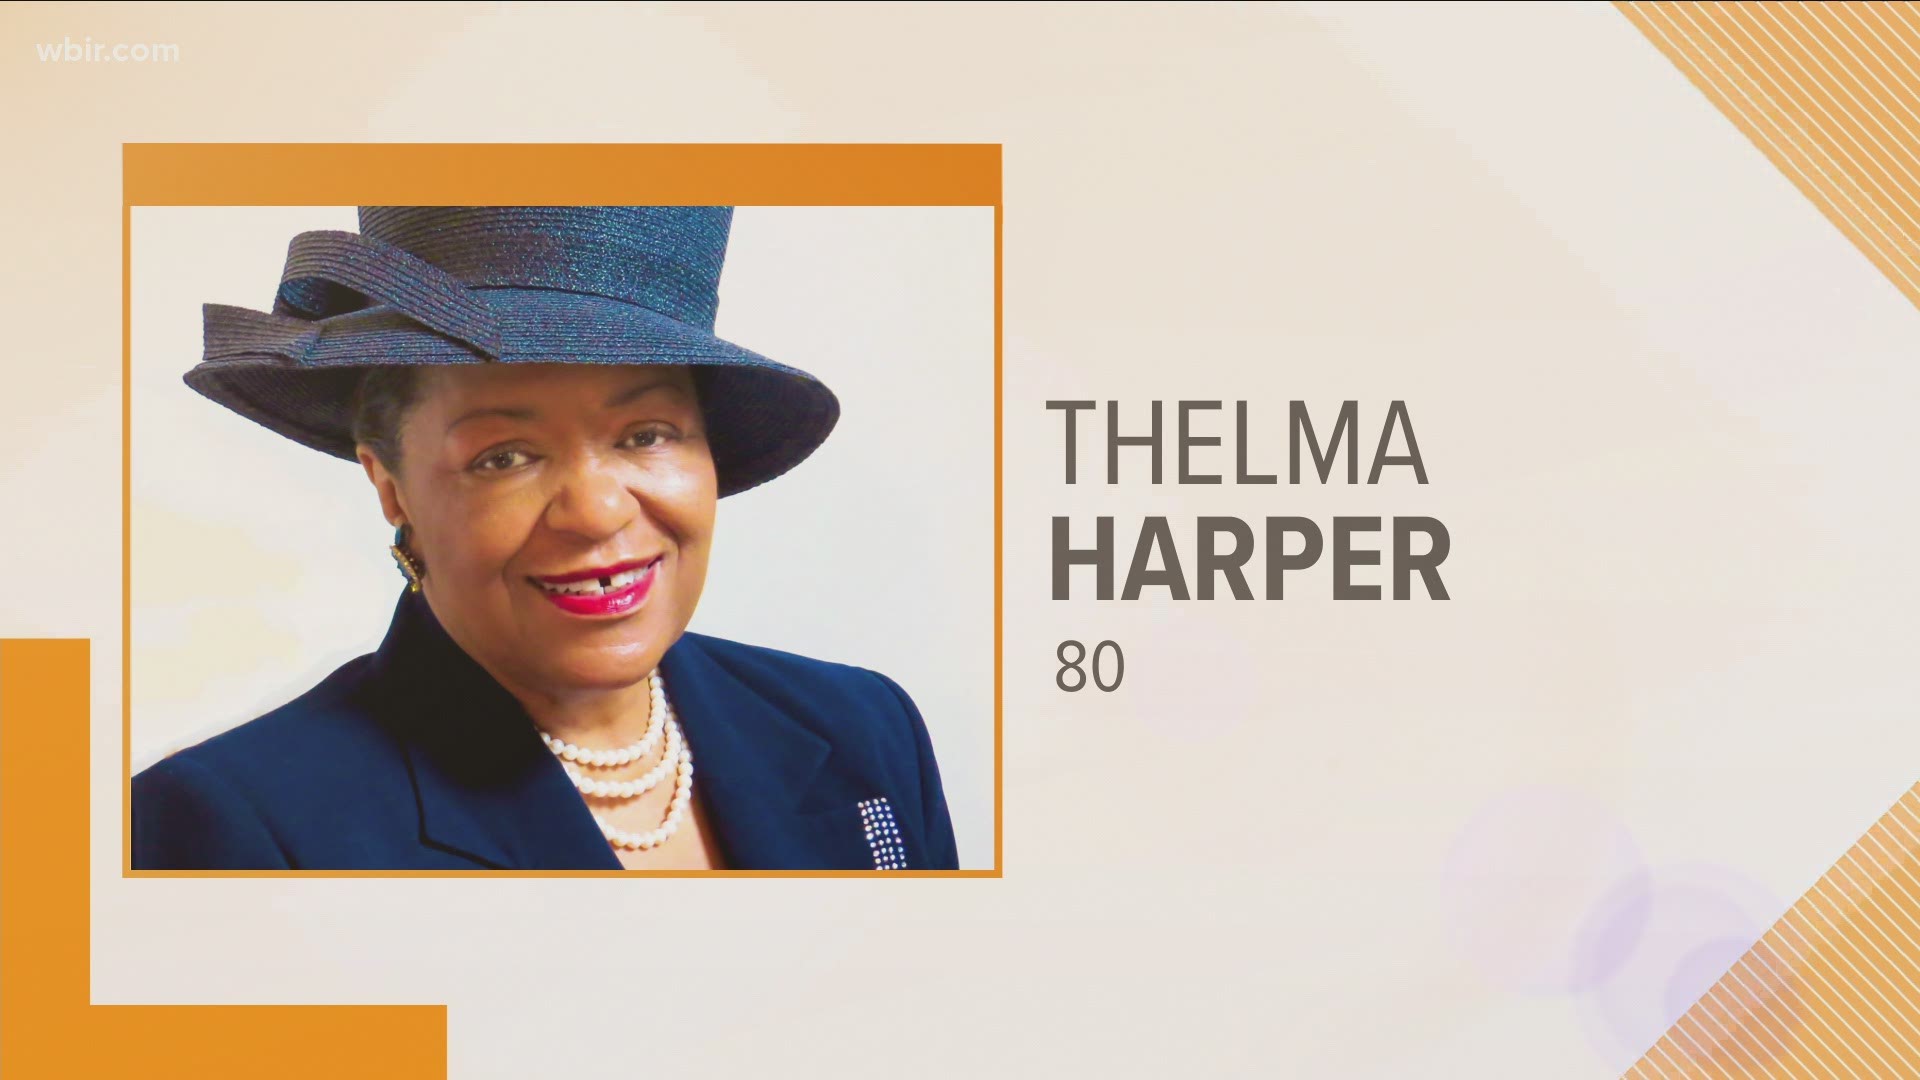 She was the first African American woman elected to the Tennessee State Senate and was the longest-serving female state Senator in state history when she retired.